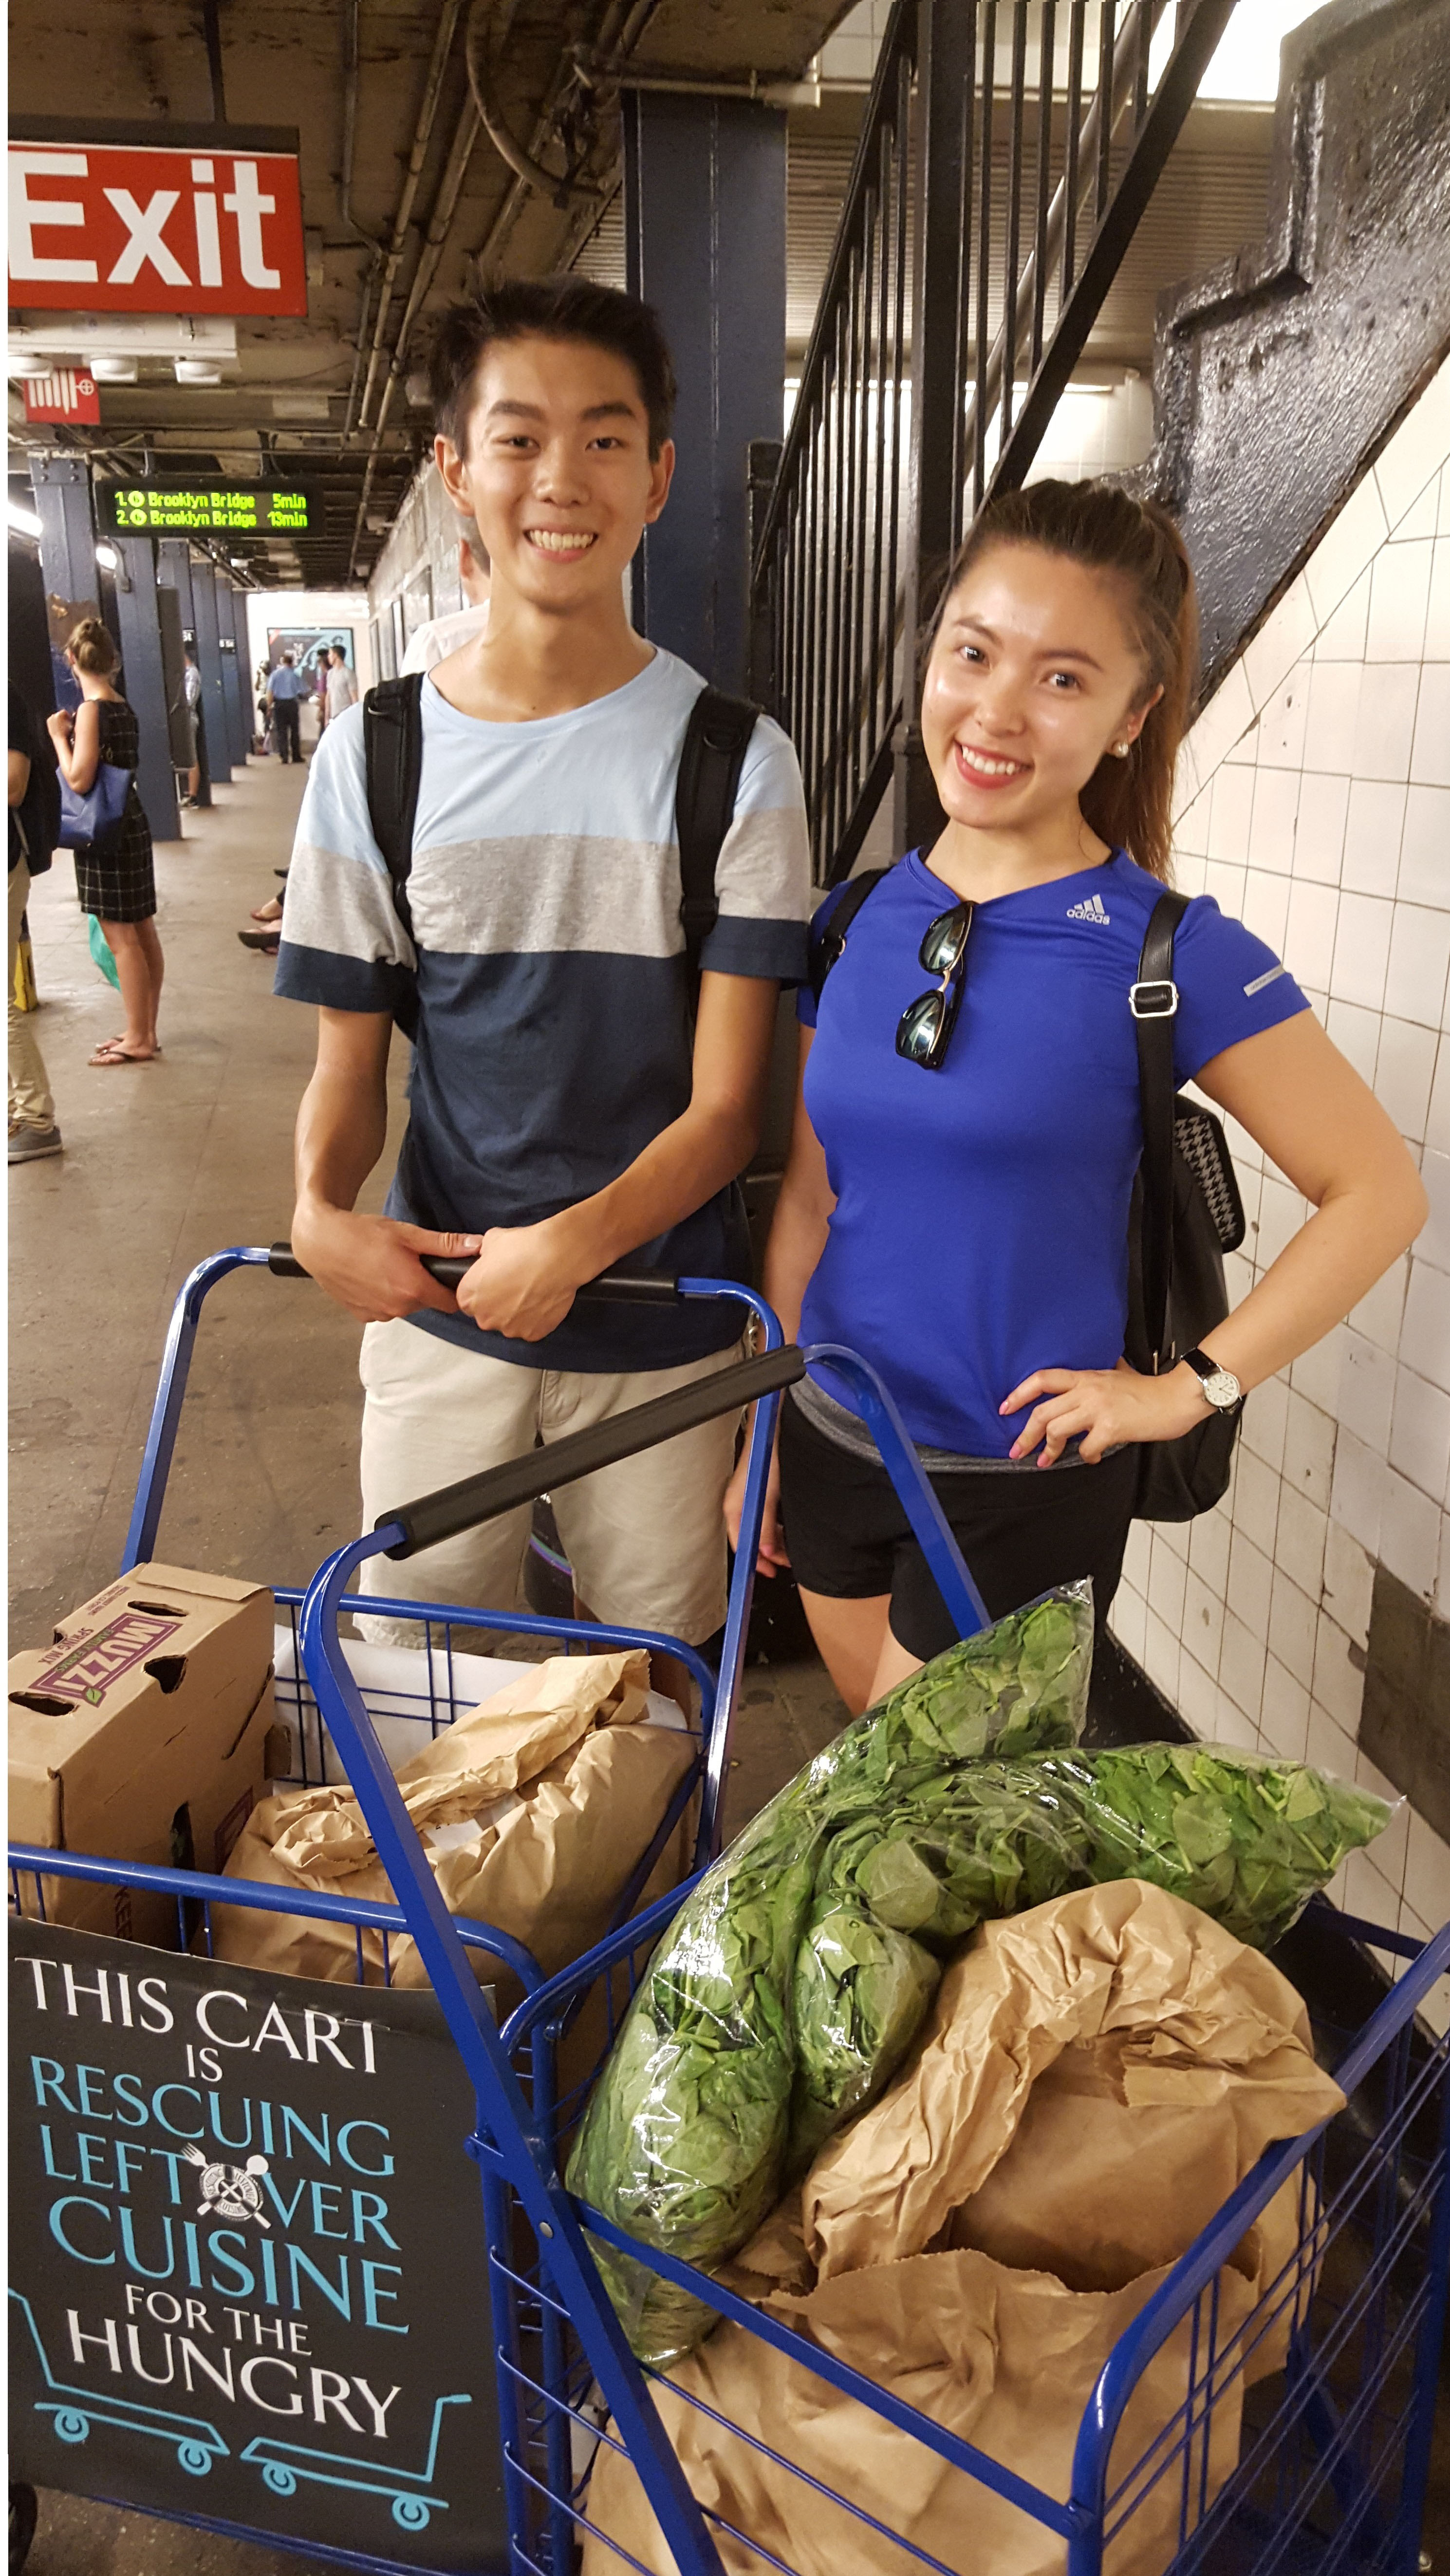 Man and woman rescue food in carts for Rescuing Leftover Cuisine